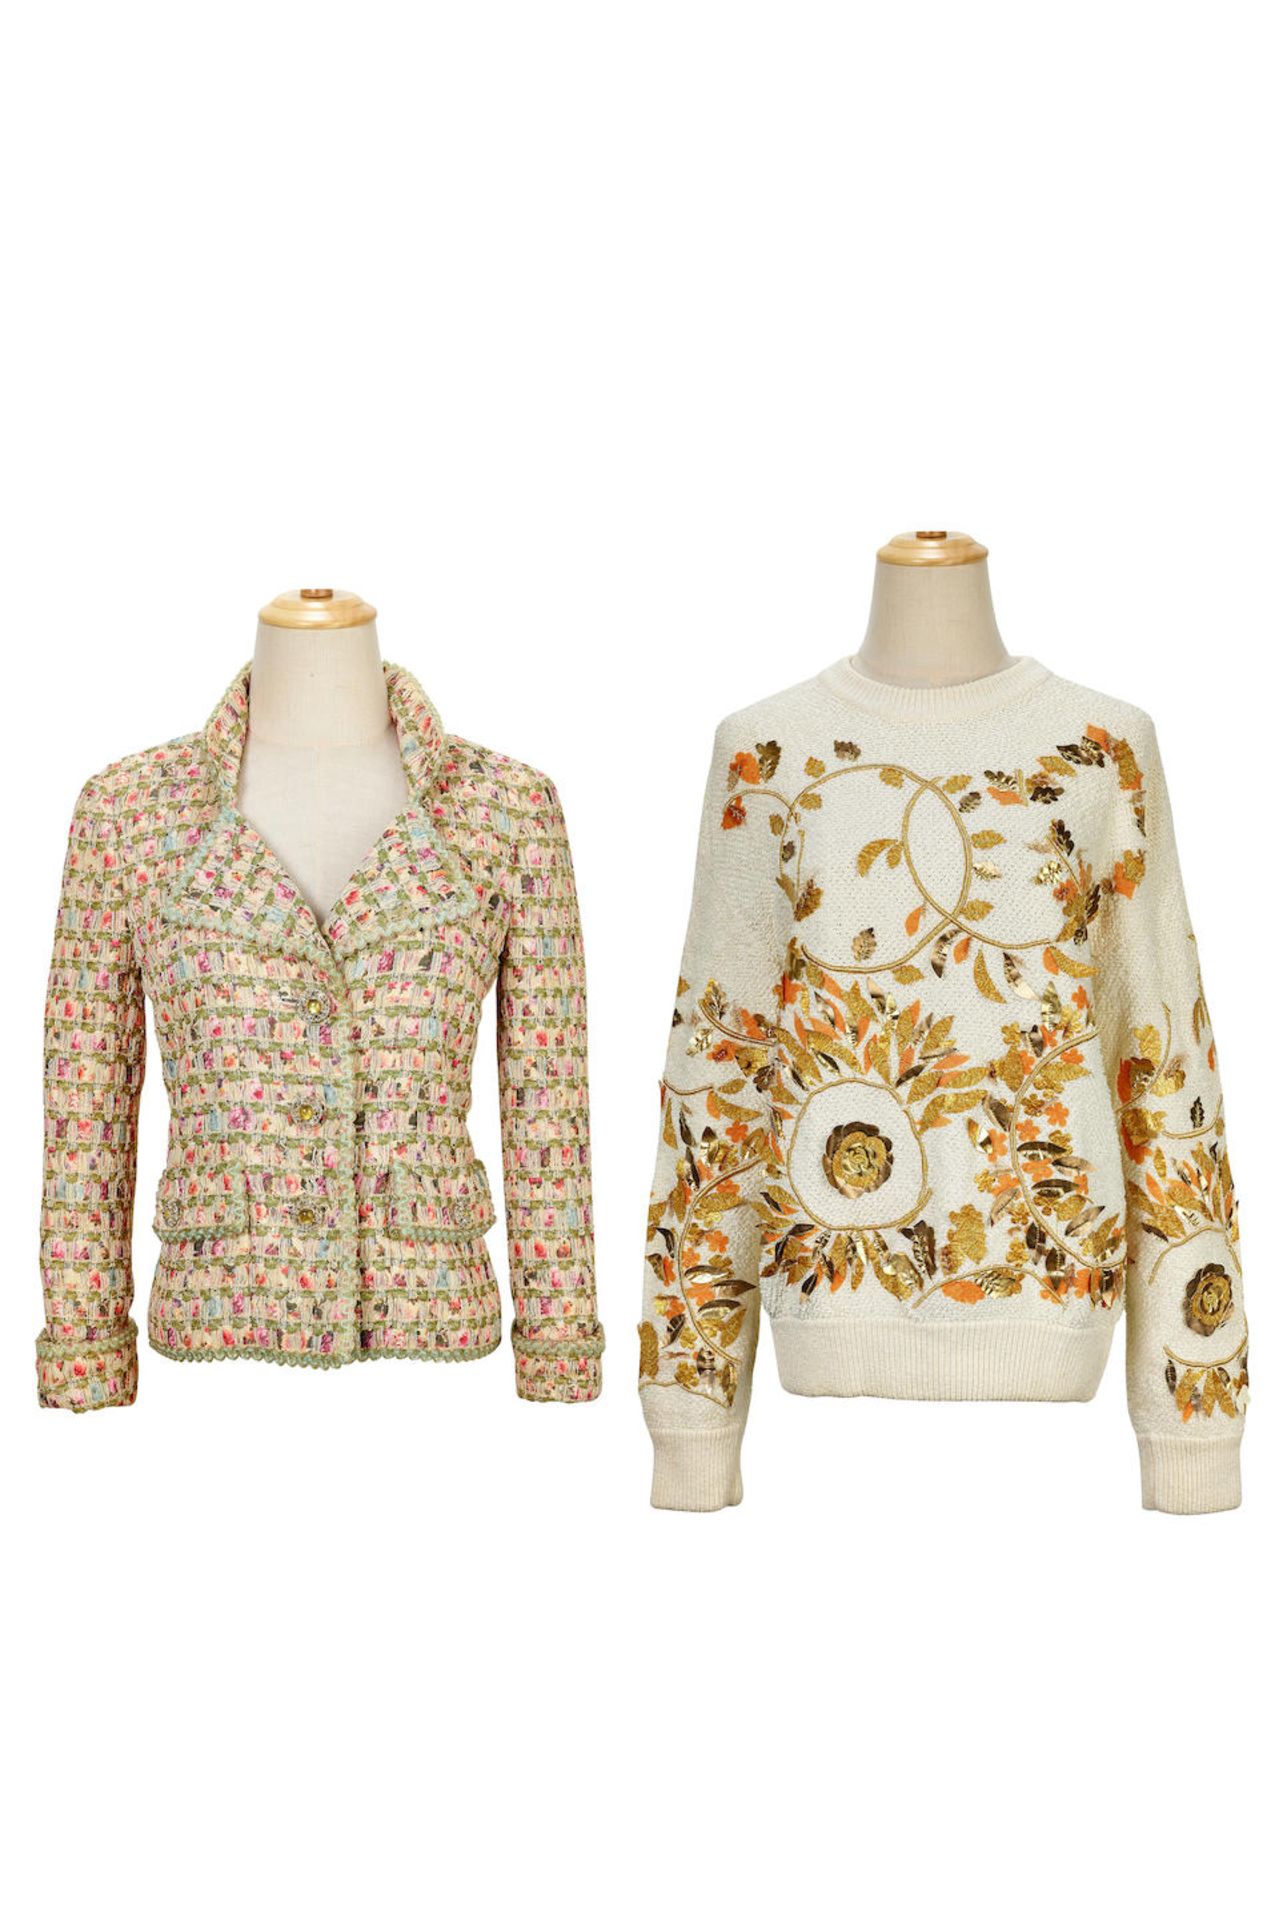 [NO RESERVE] CHANEL: A SET OF 2 MULTI COLOURED JACKET AND GOLD LEAF EMBORDERY TOP